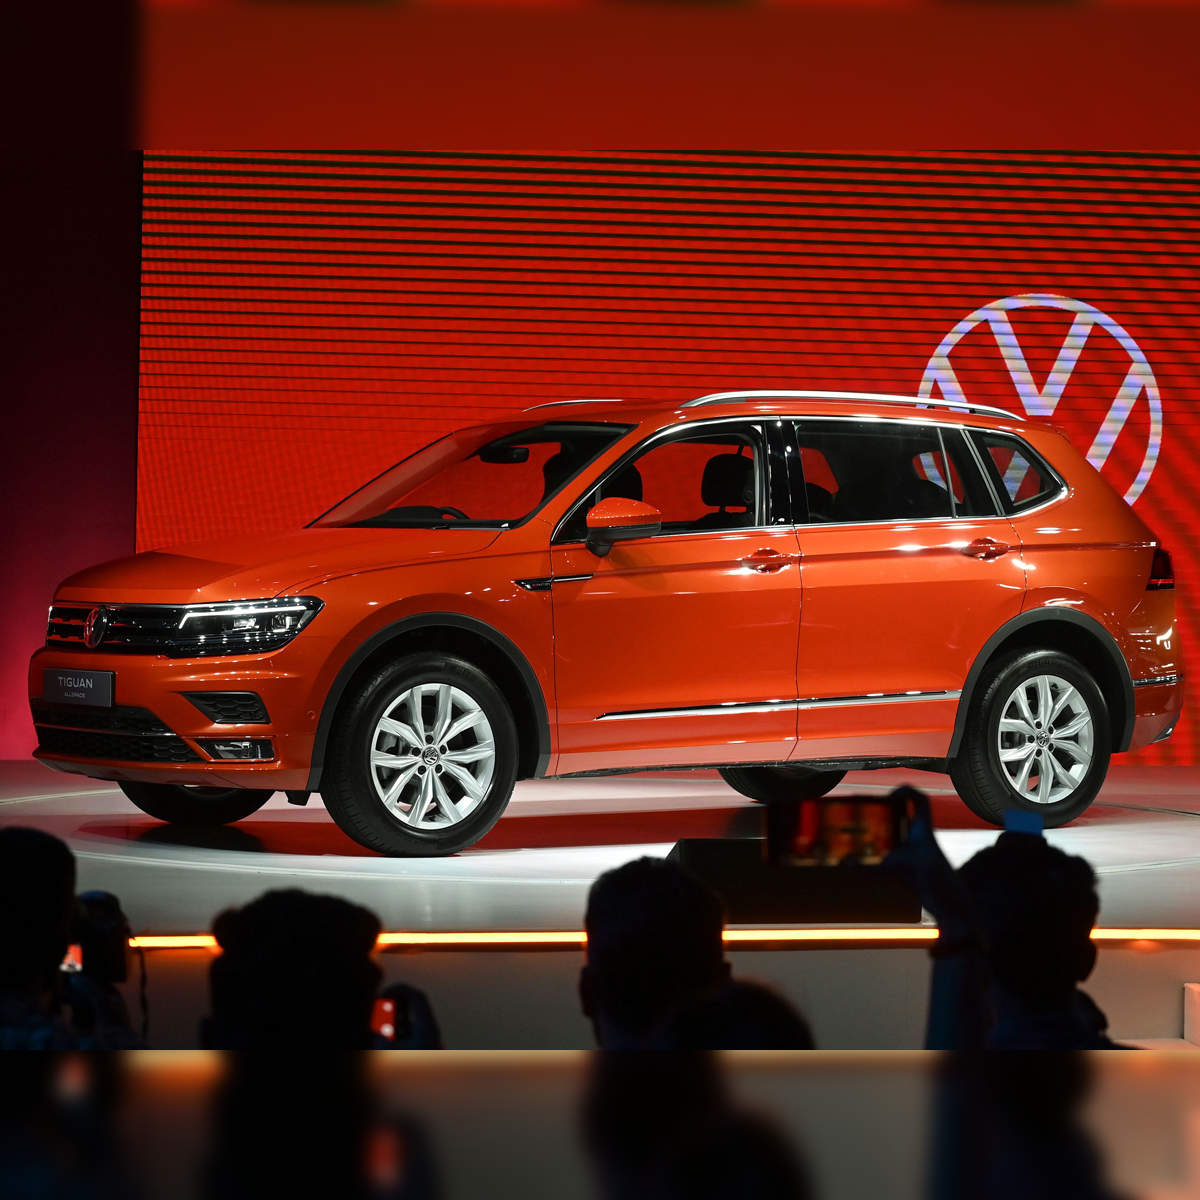 Volkswagen launches 7-seater SUV, Tiguan Allspace , at Rs 33.12